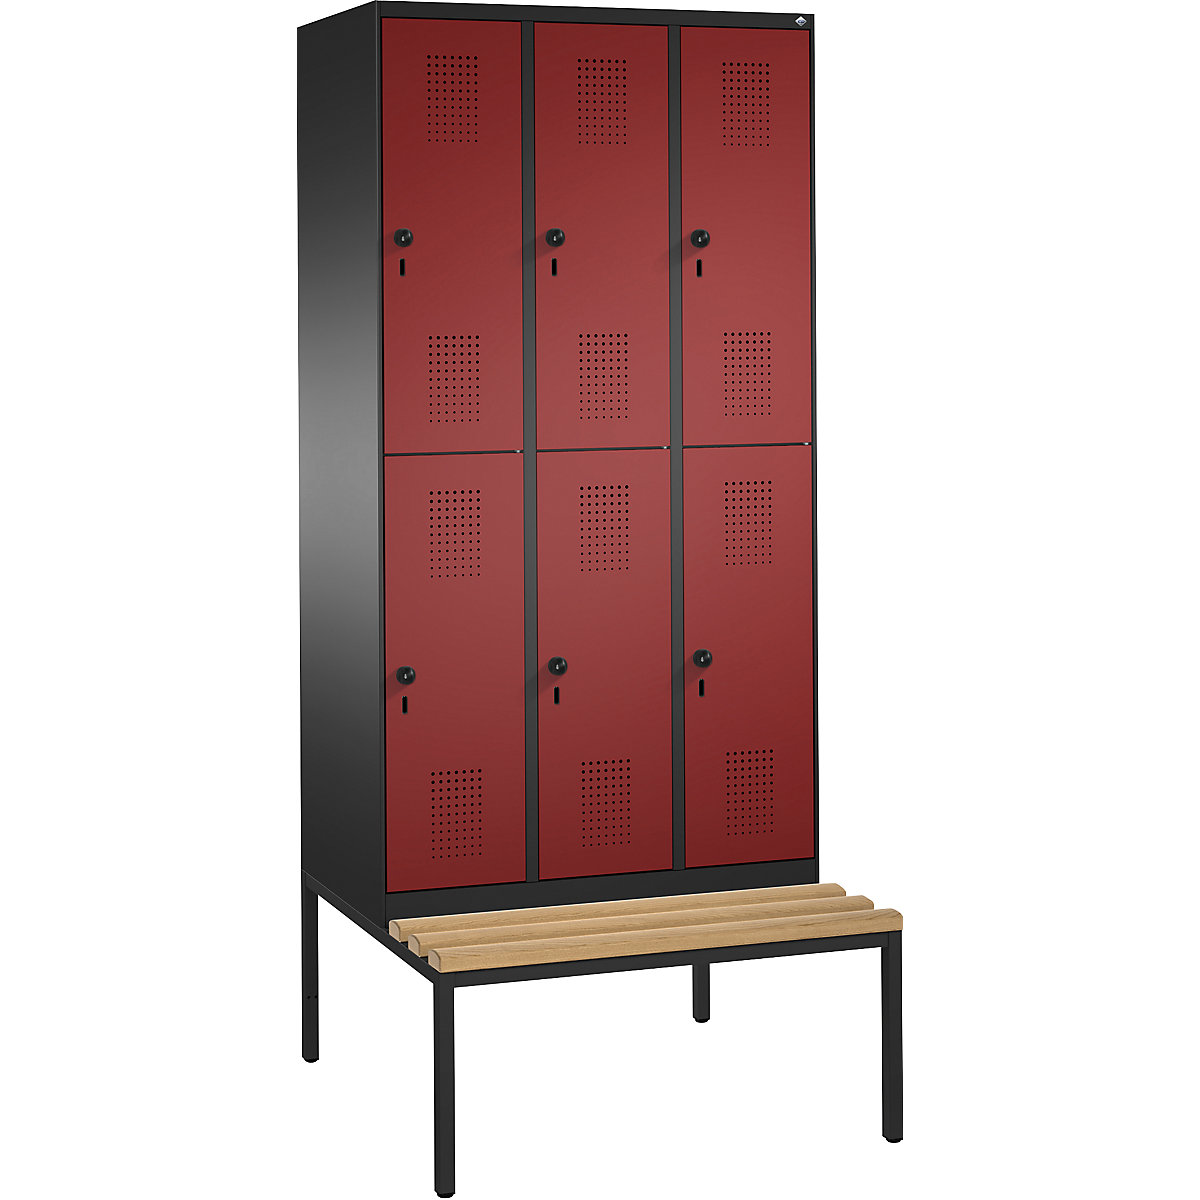 EVOLO cloakroom locker, double tier, with bench – C+P, 3 compartments, 2 shelf compartments each, compartment width 300 mm, black grey / ruby red-14